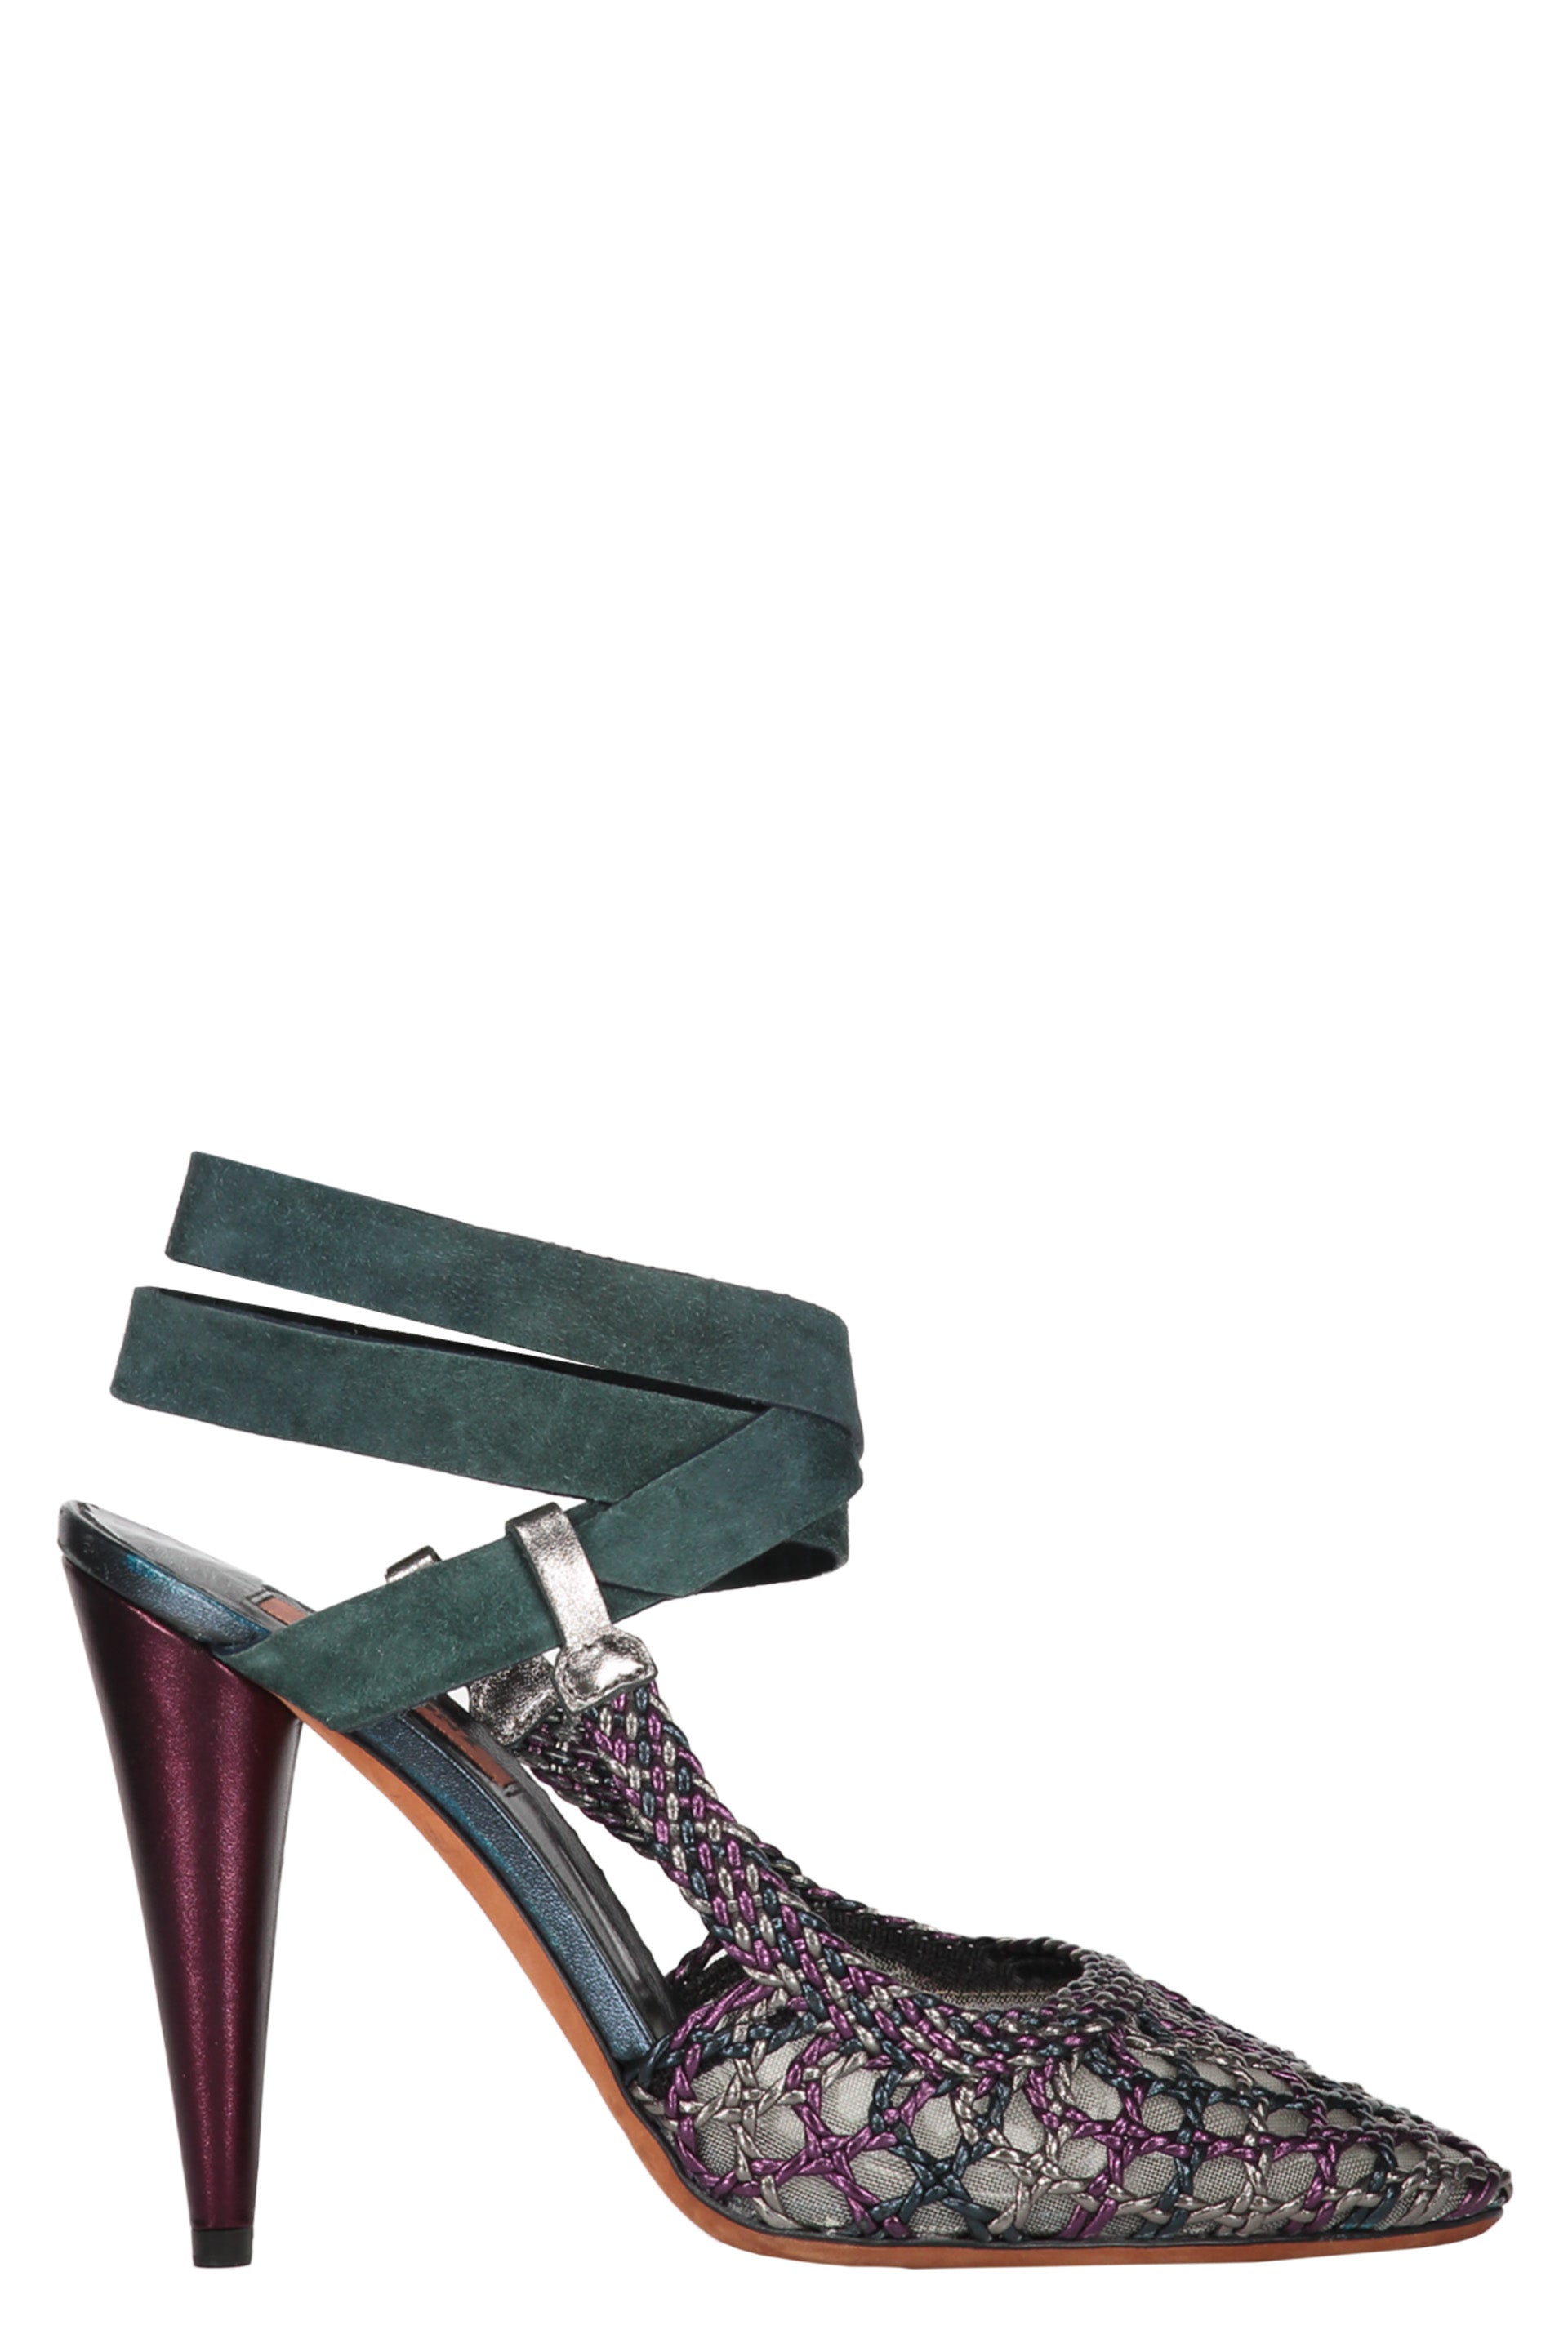 Missoni-OUTLET-SALE-Heeled-leather-sandals-Sandalen-40-ARCHIVE-COLLECTION.jpg